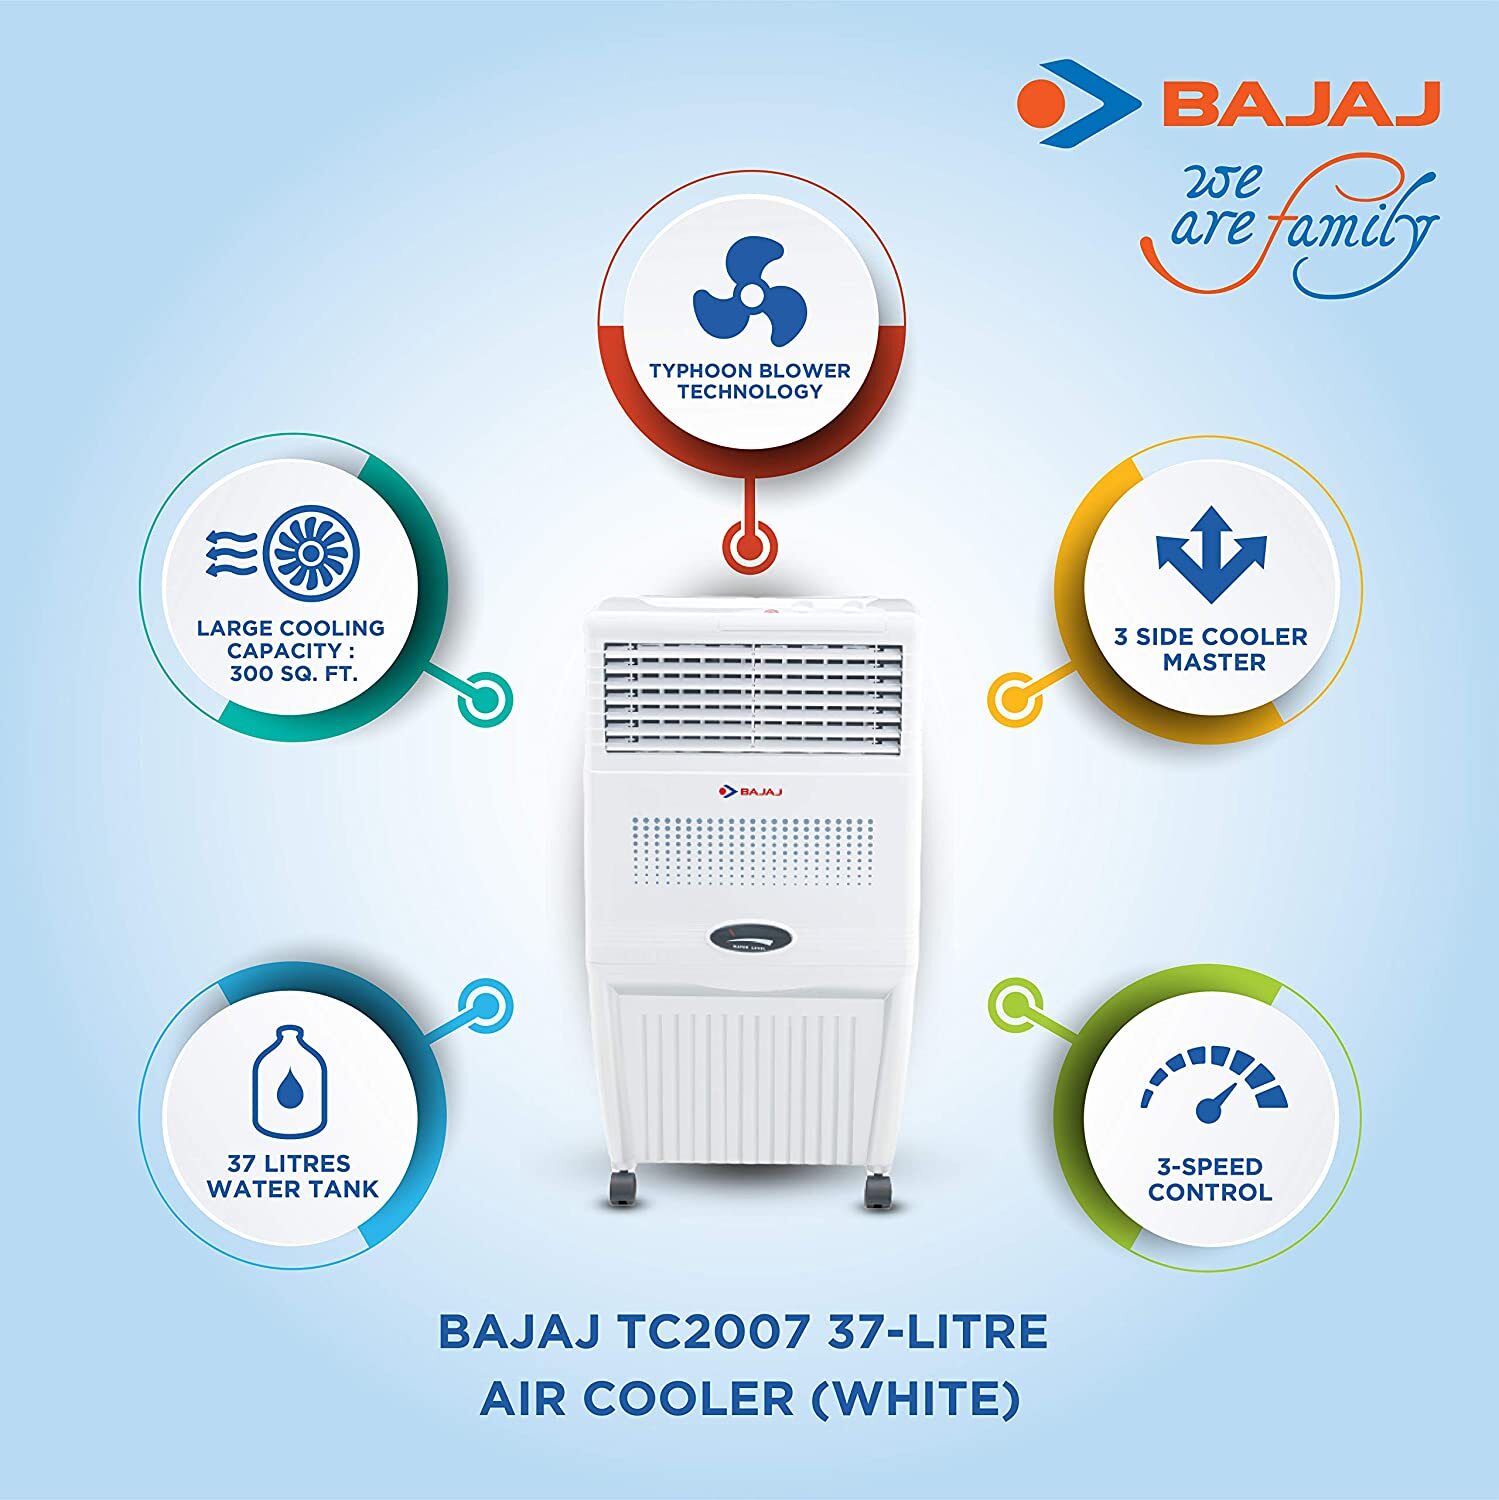 Bajaj Coolest TC 2007 Tower Air Cooler White and 37 Litres-M000000000410 www.mysocially.com